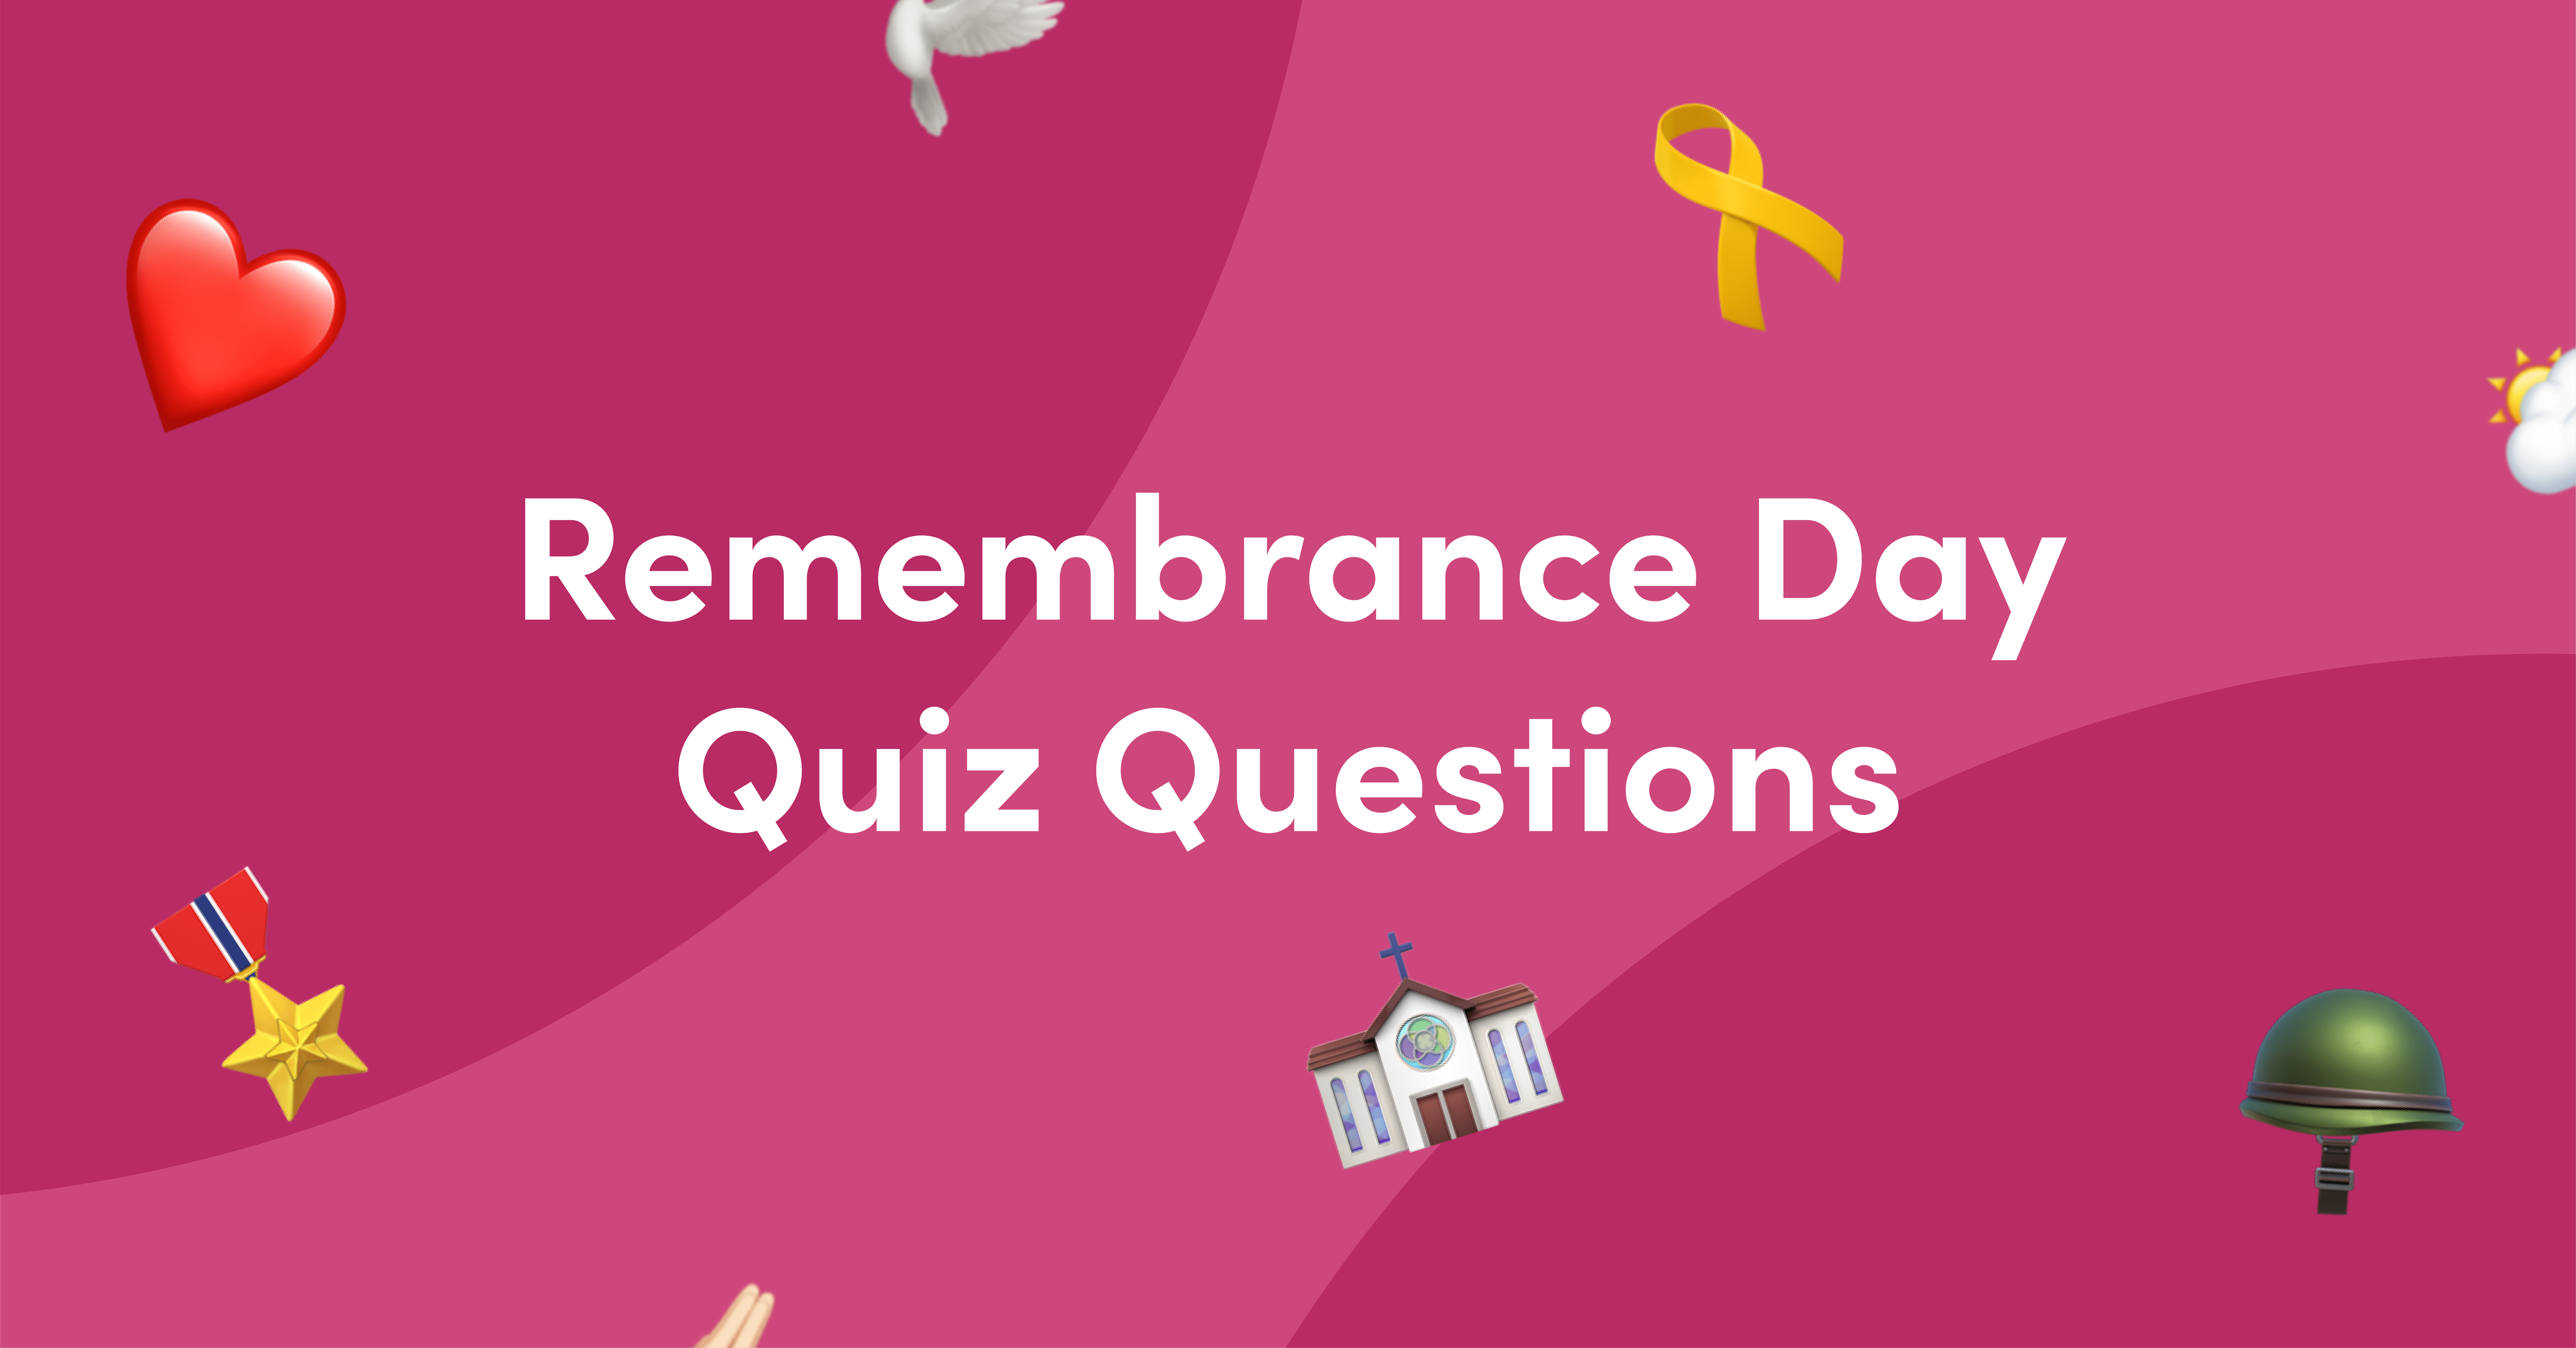 25 Remembrance Day Quiz Questions and Answers